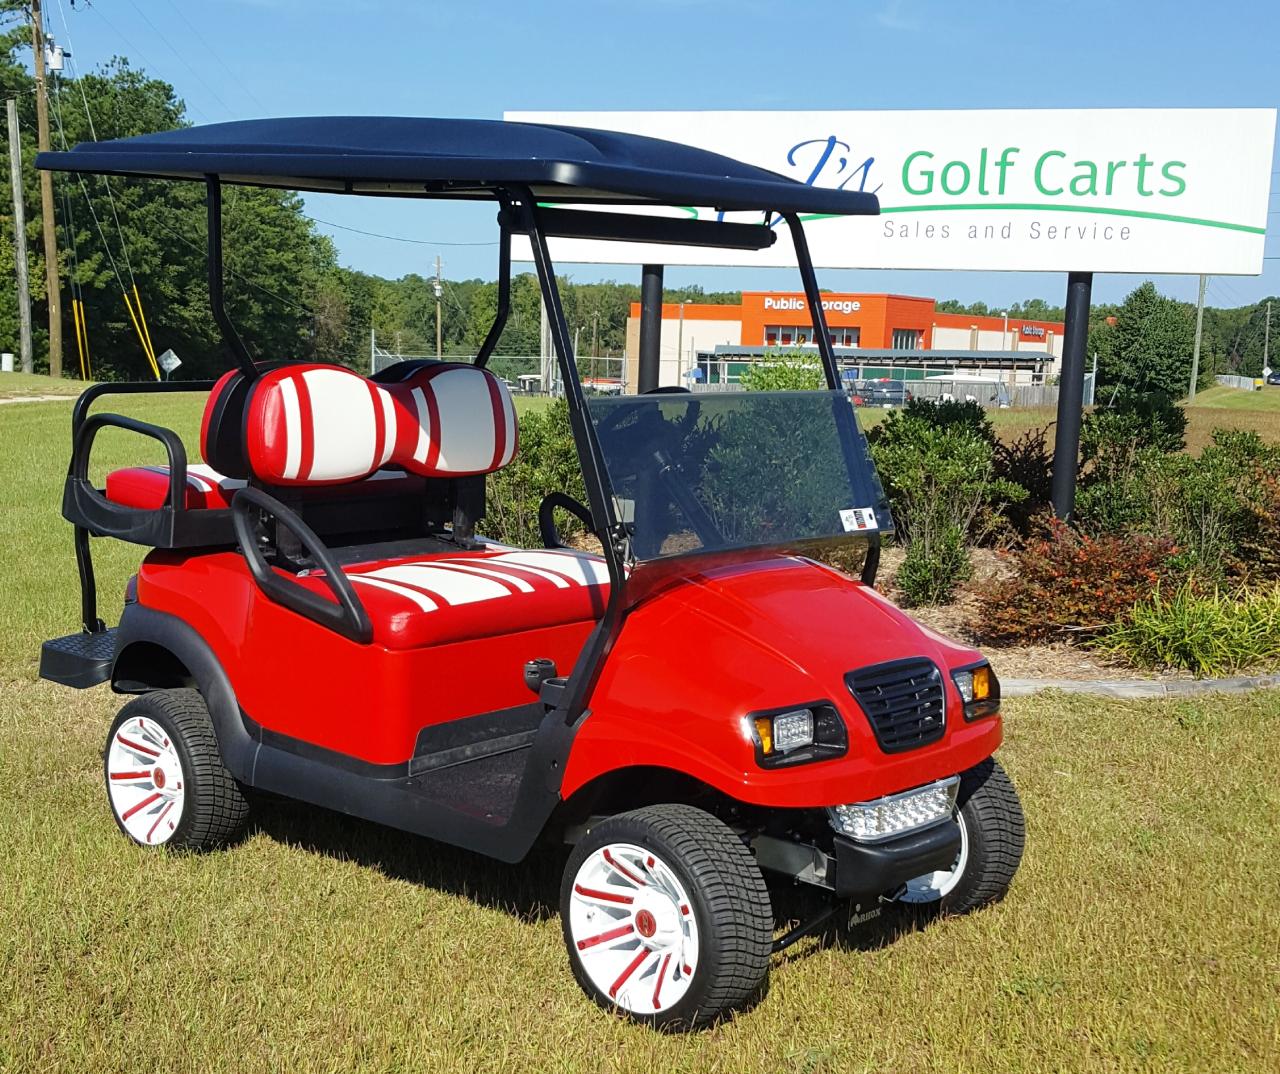 Used Golf Carts for Sale by Owner in Sherman, Texas: Explore the Market, Find the Perfect Ride